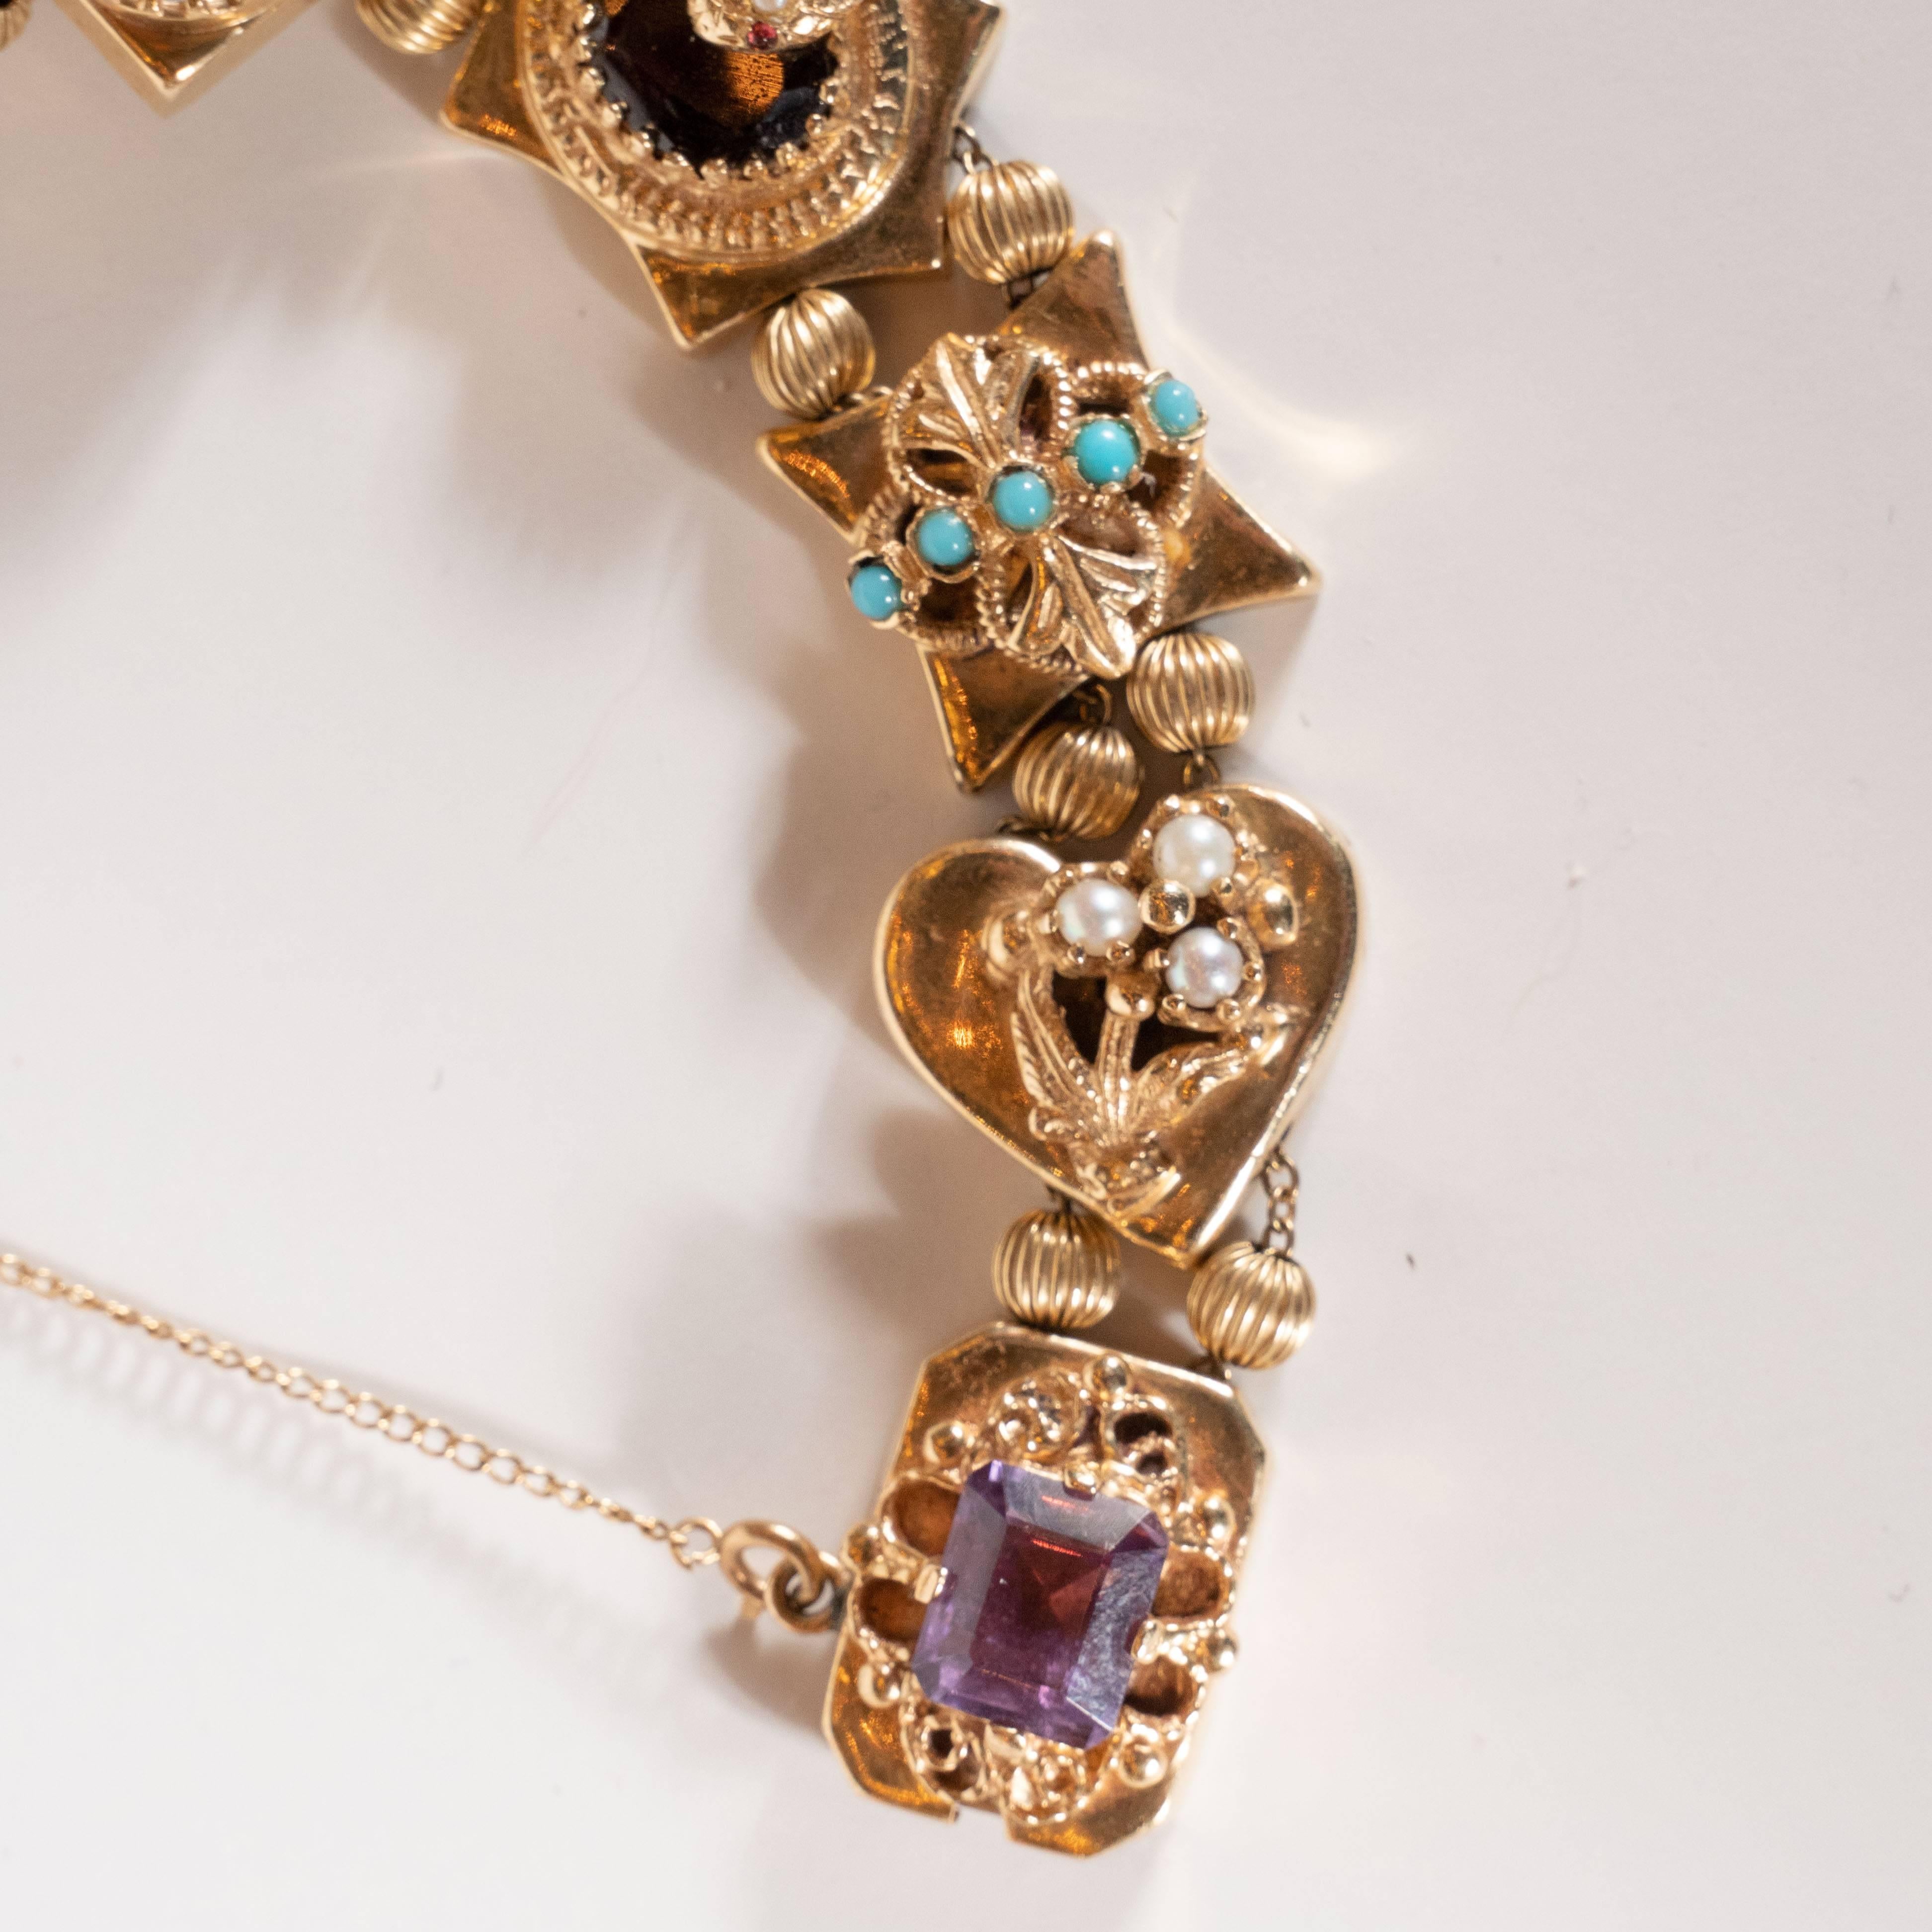 1940s Gold Slide Bracelet with Citrine, Sapphire, Rubies, Garnets and Pearls 4